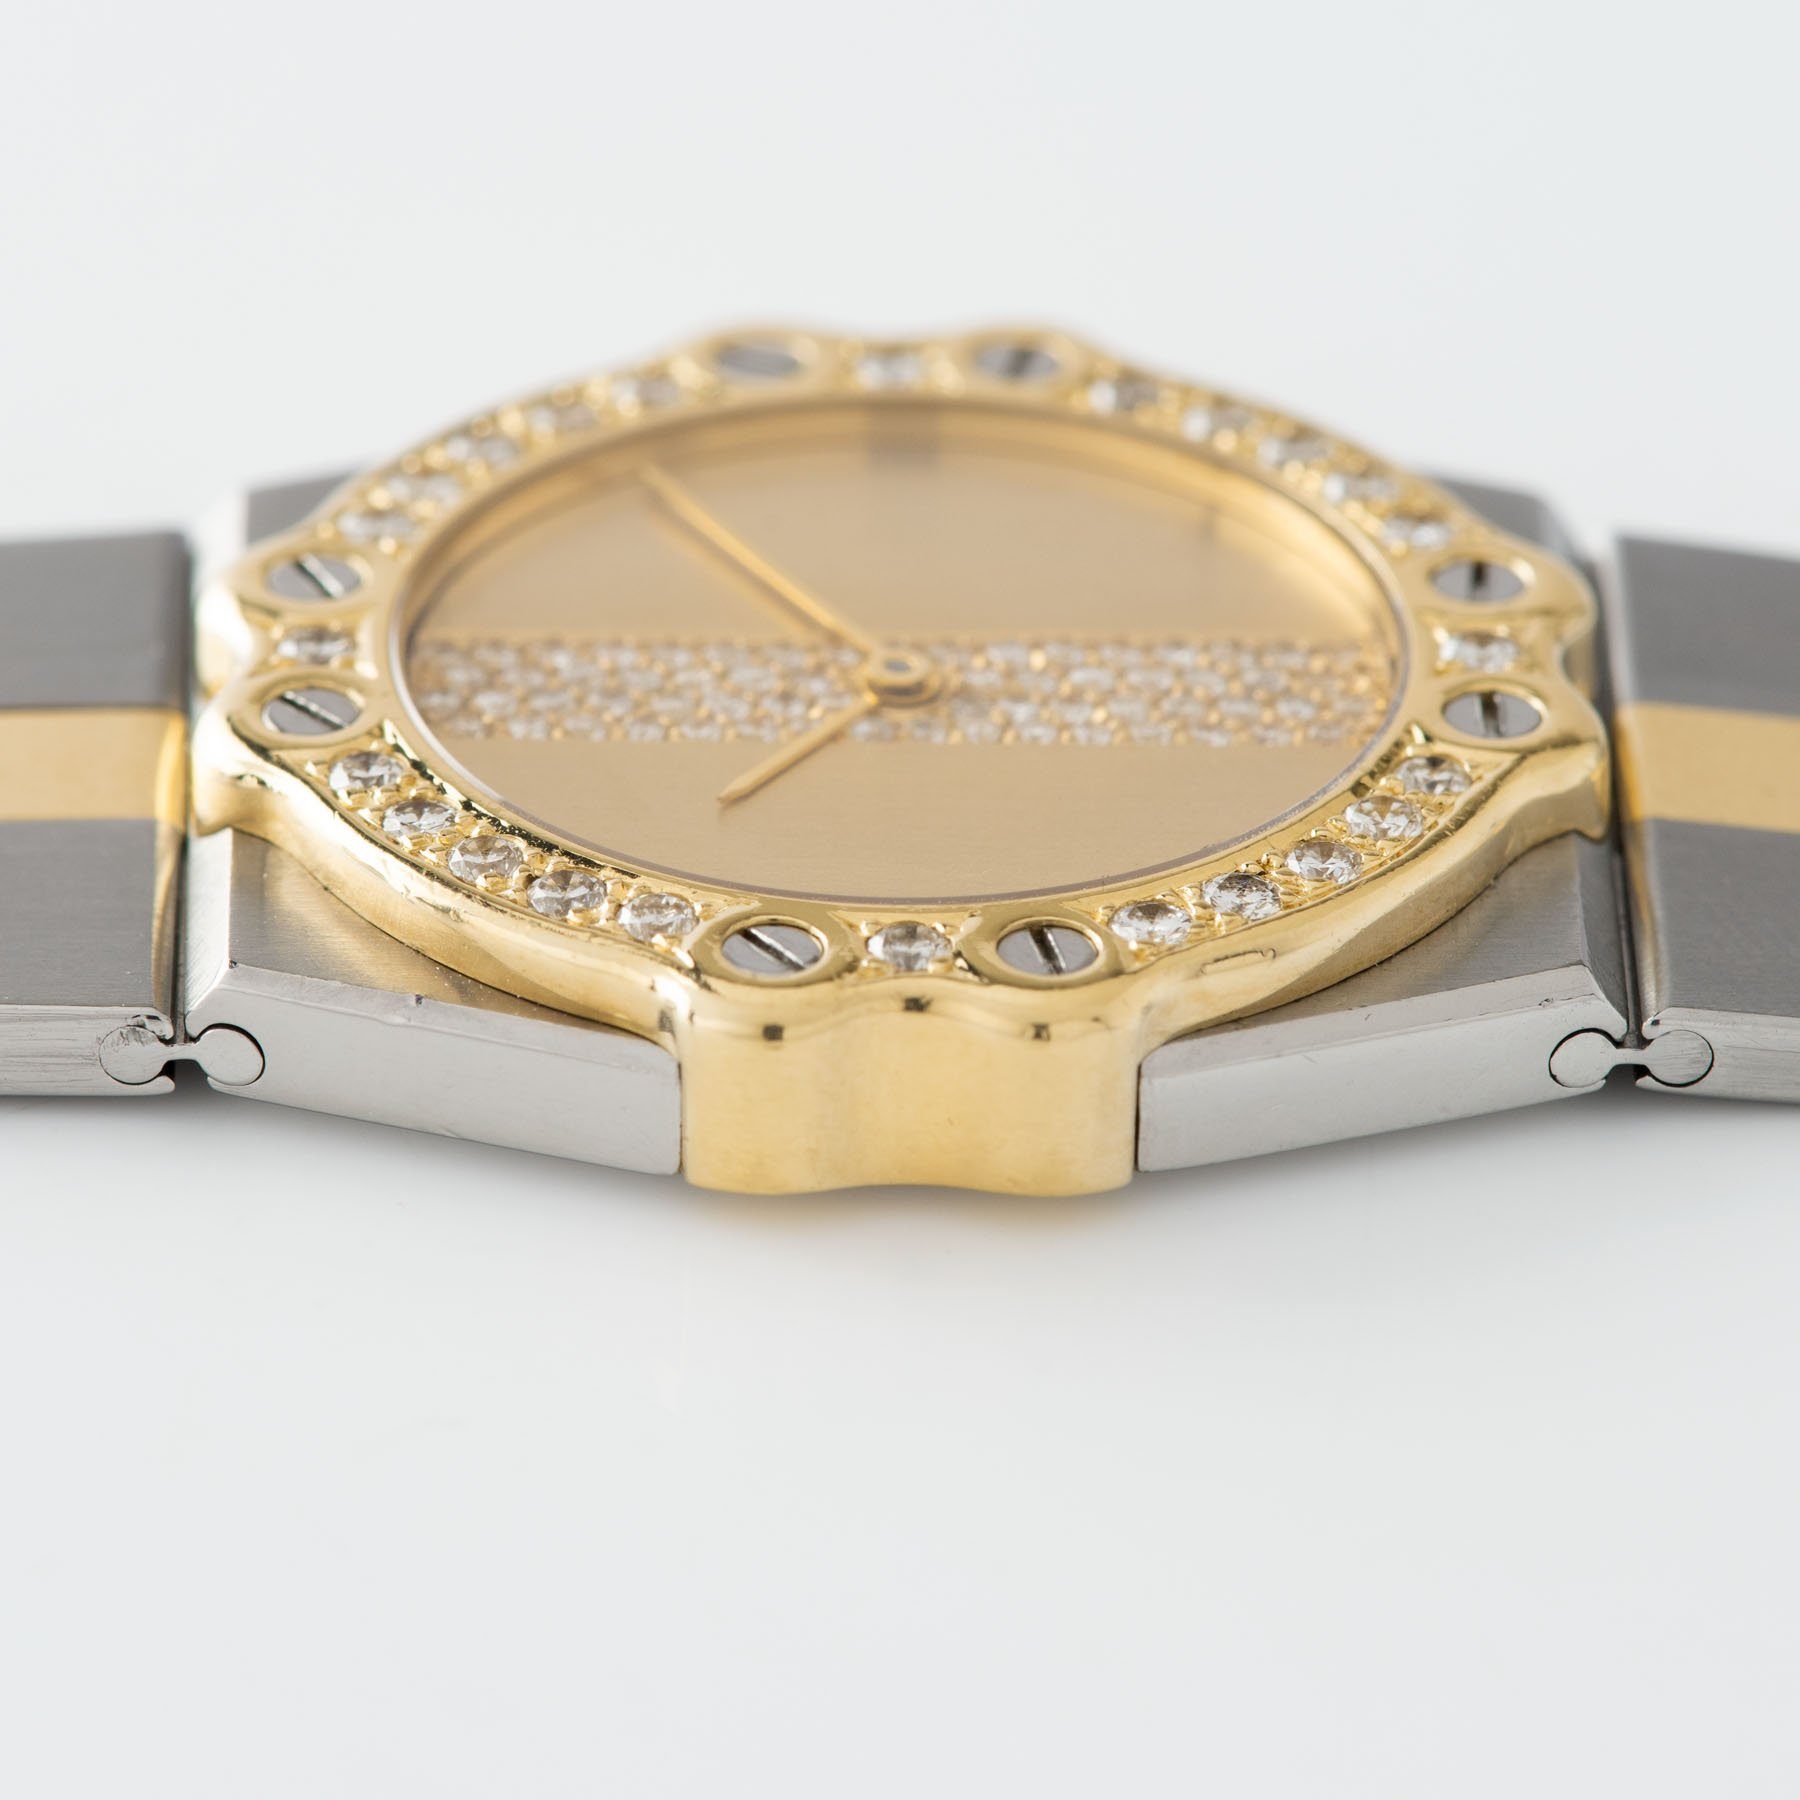 Chopard St Moritz Steel and Gold Reference 8023